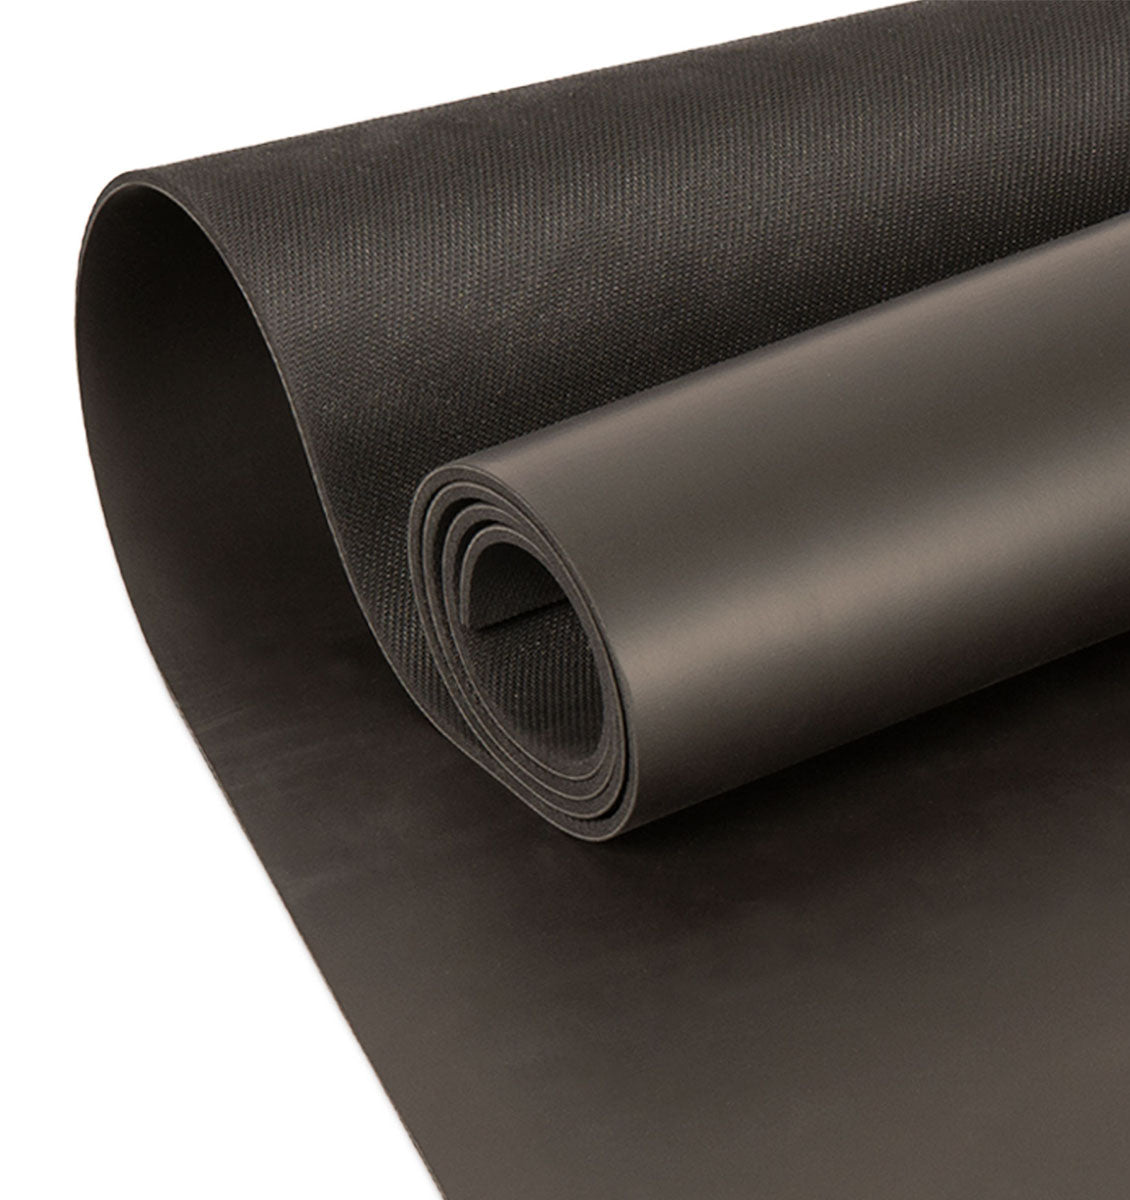 BAHE Power Hold Yoga Mat - 4mm - Anthracite - 4